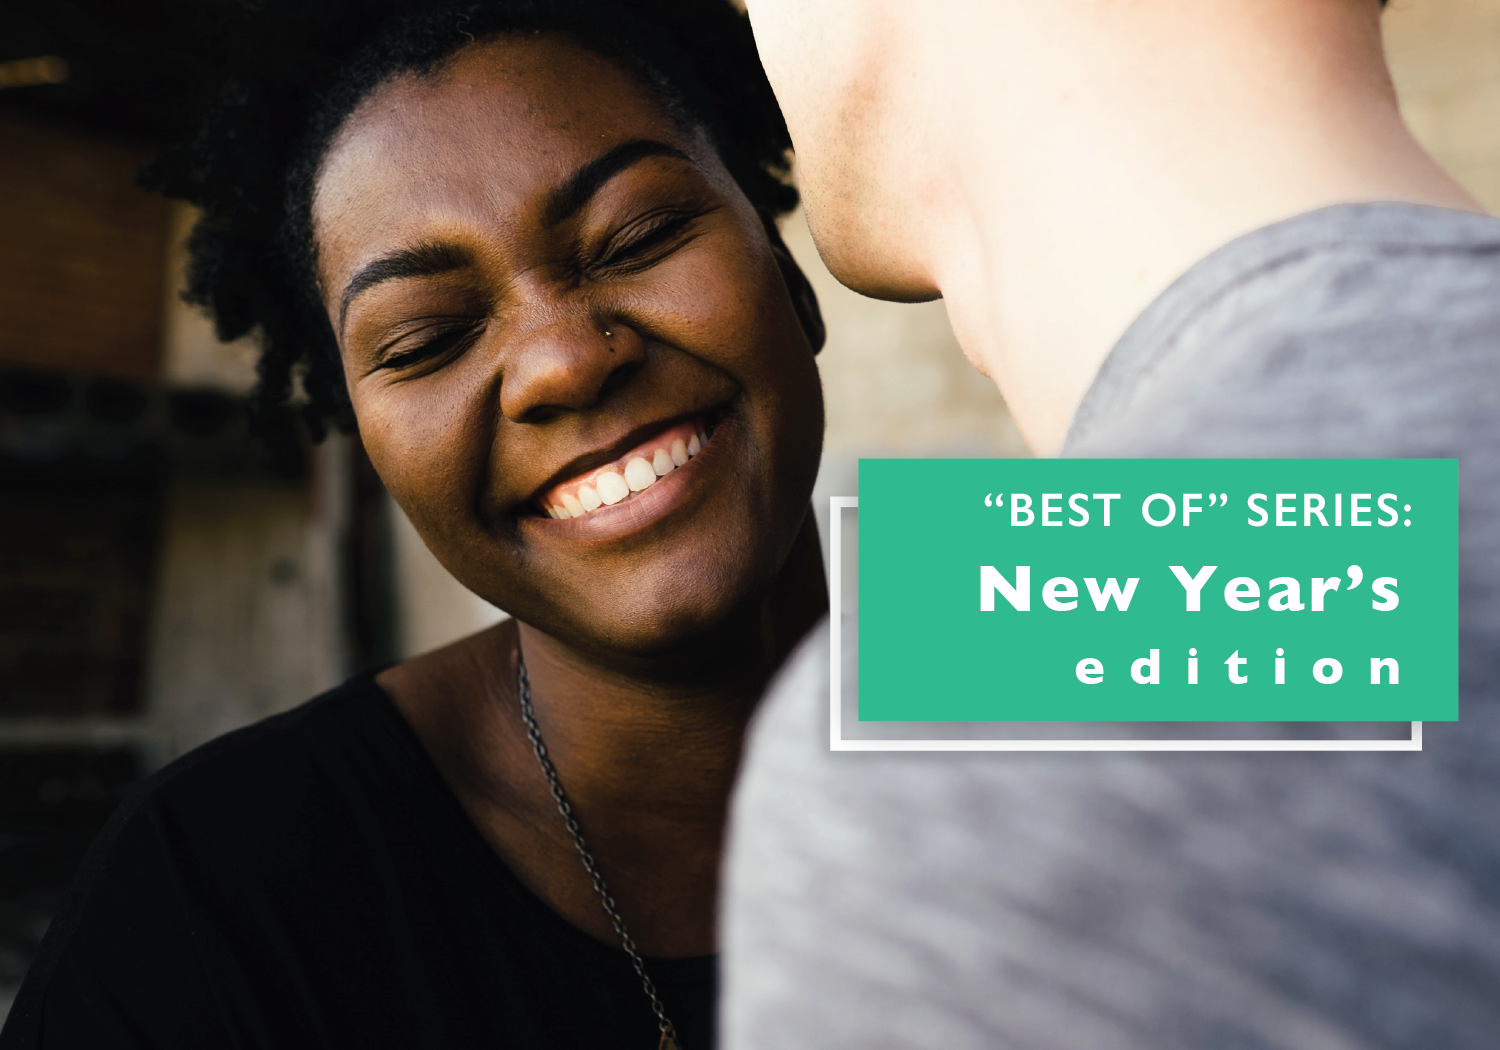 Best of Series – Top Places to Meet New People in 2018